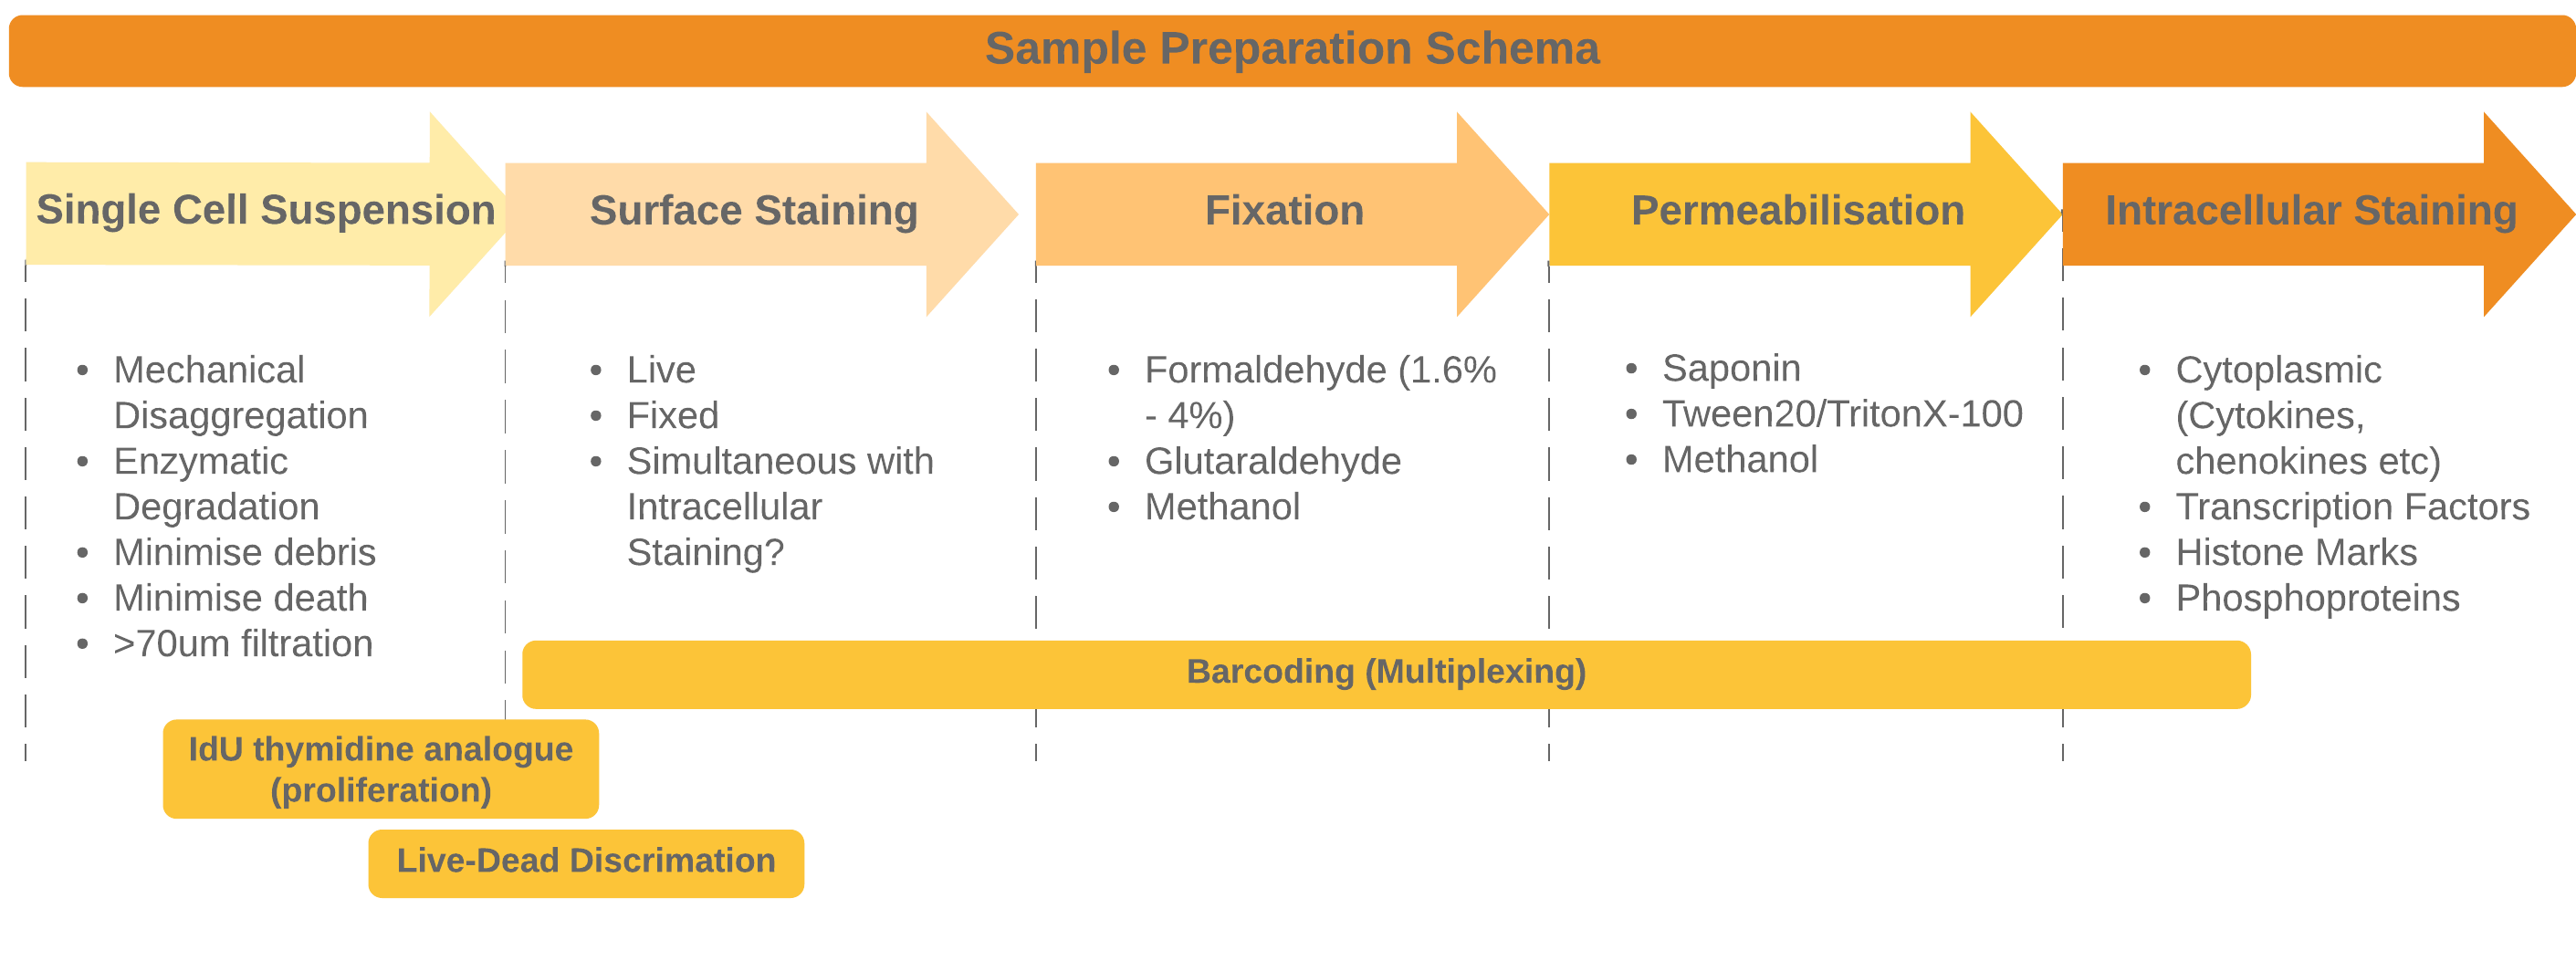 The general approach to sample preparation and staining with some common optional procedures